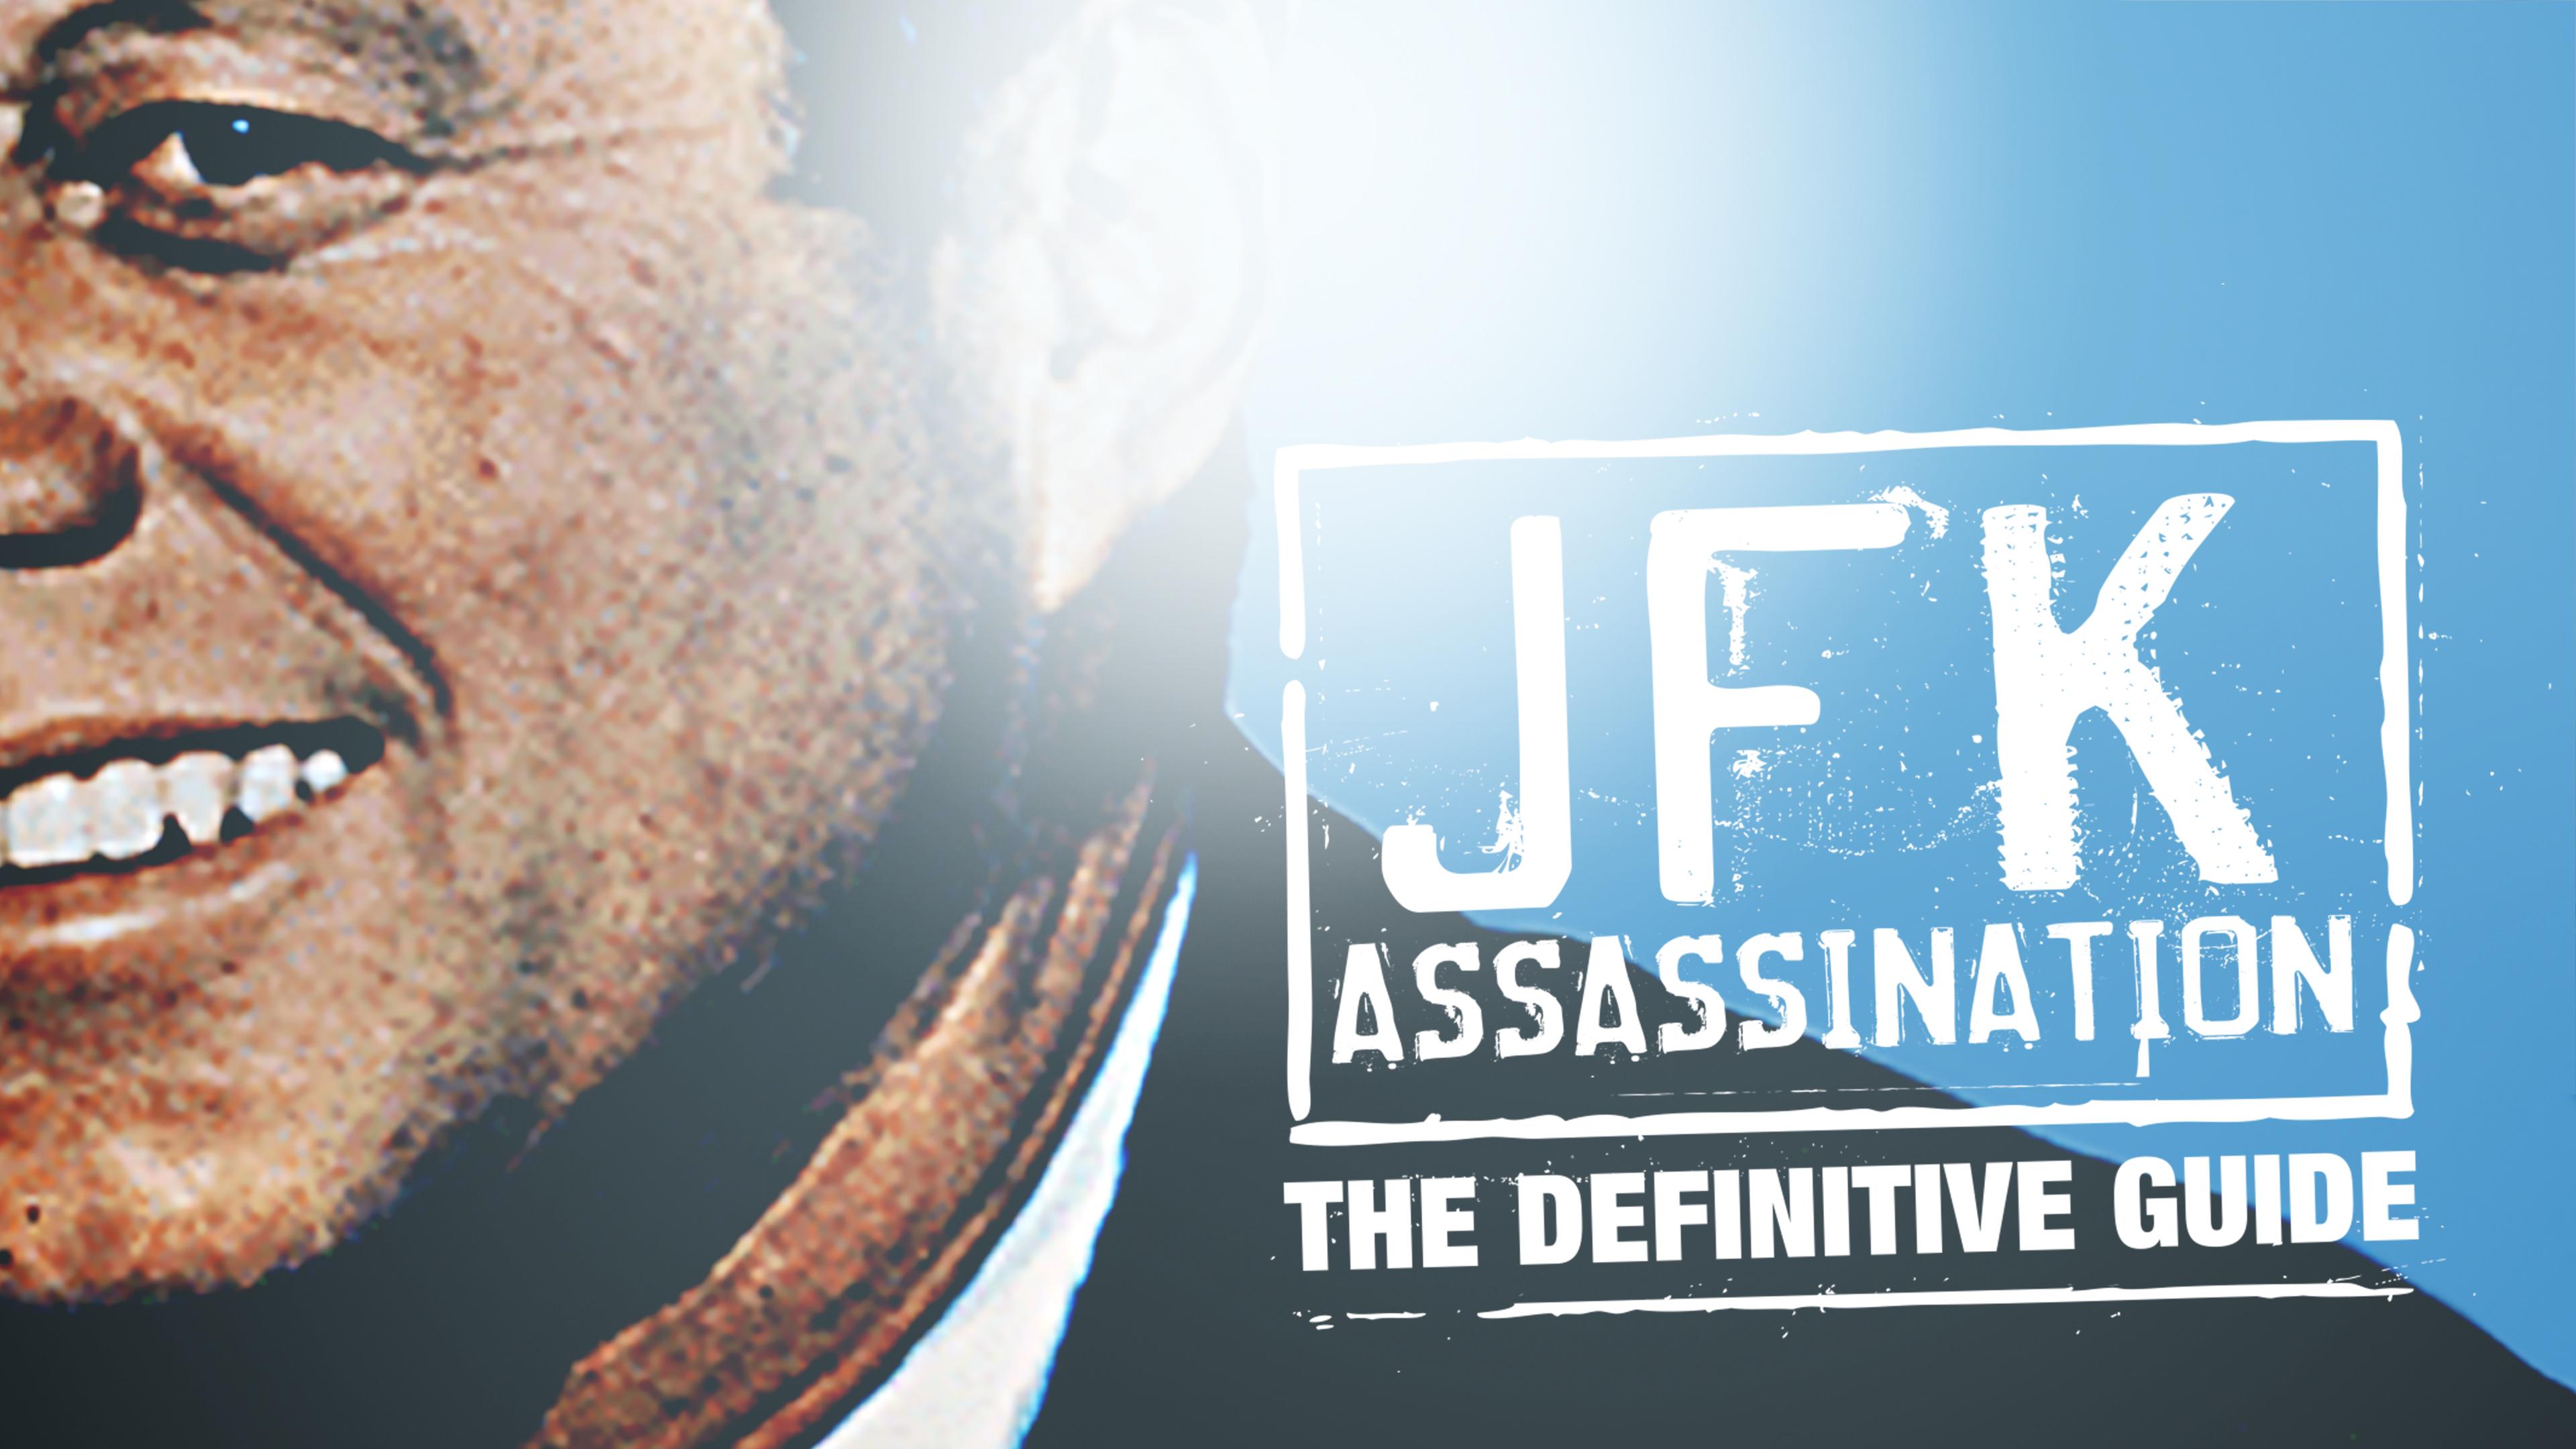 Watch Jfk Assassination The Definitive Guide Streaming Online On Philo Free Trial 